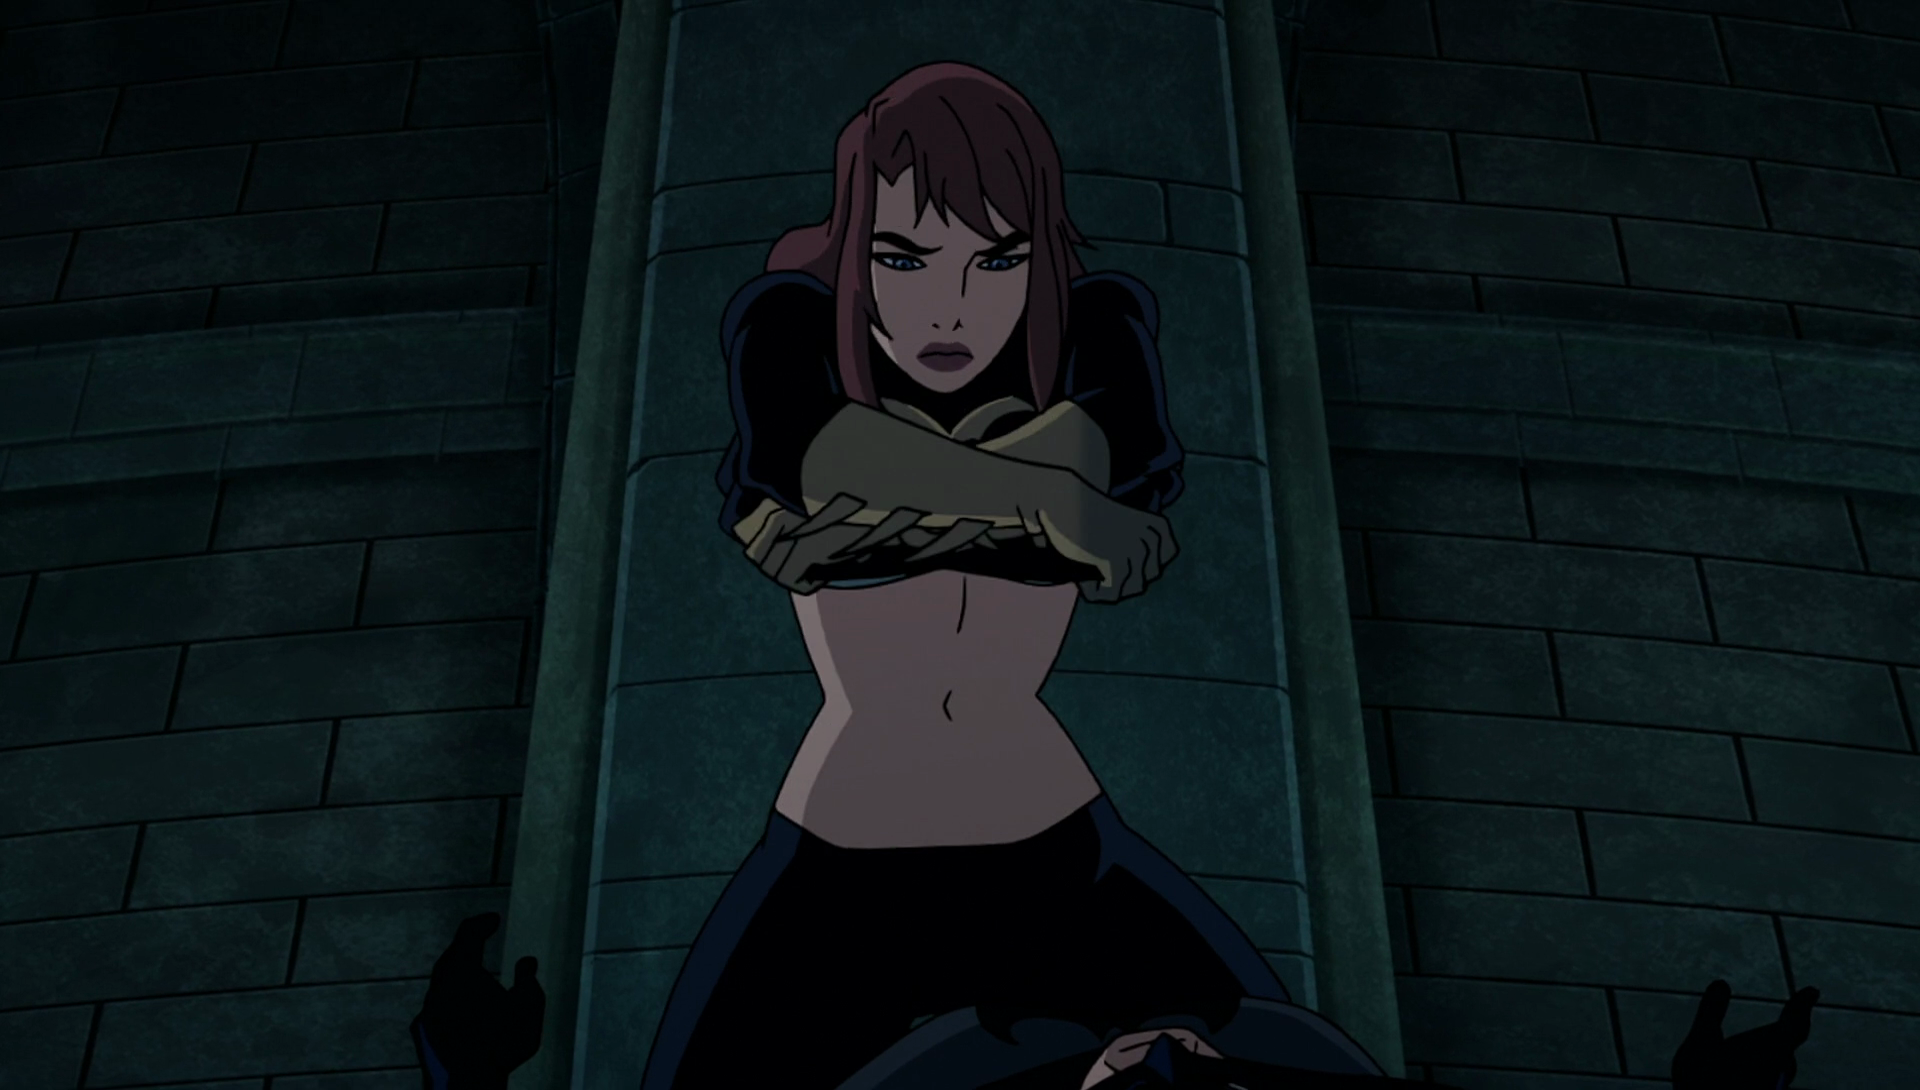 Continue below for an assortment of screengrabs from the Batman: The Killin...